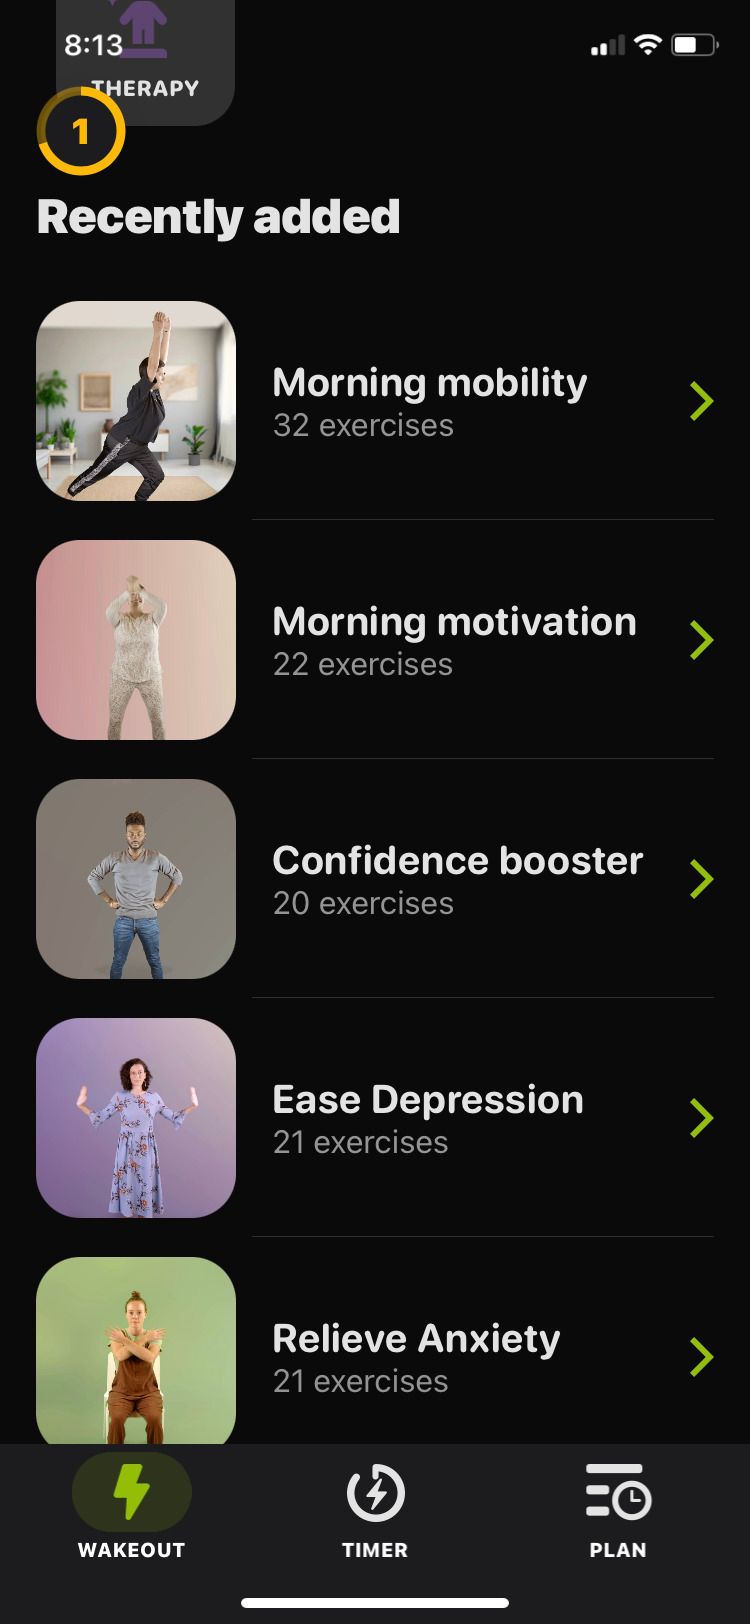 Wakeout! - Exercise breaks new additions screen